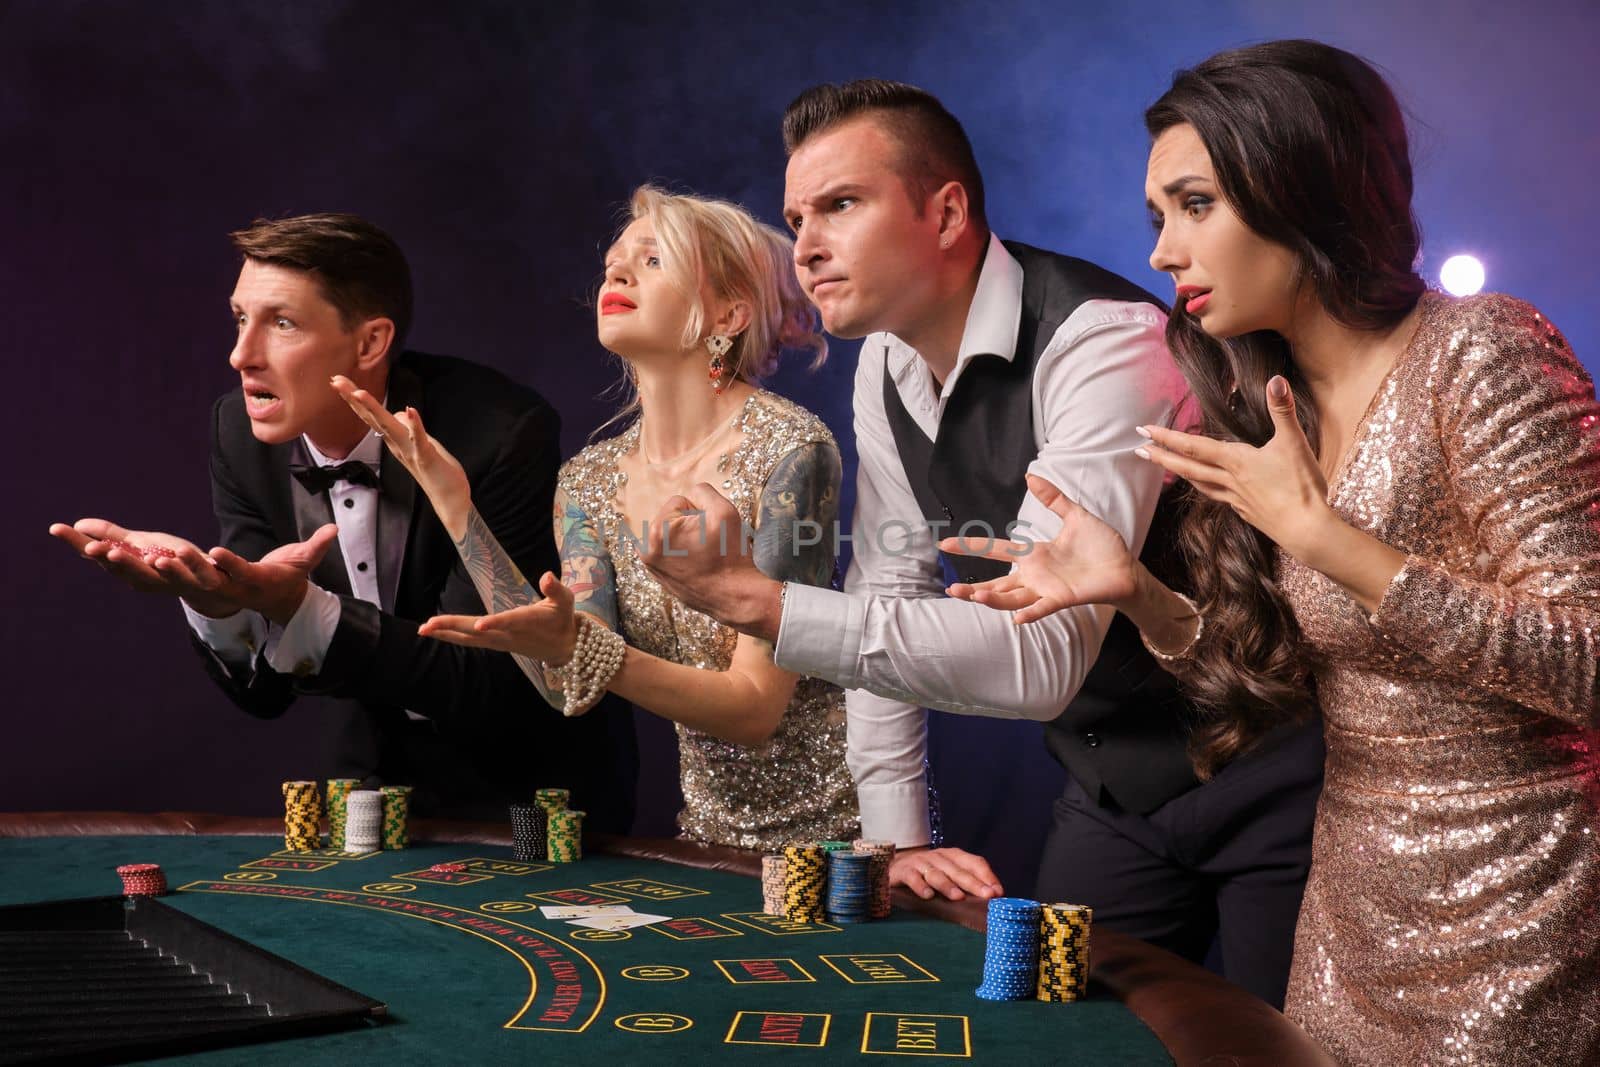 Side shot of an upset rich companions playing poker at casino in smoke. Youth are making bets waiting for a big win. They are standing at the table against a red and blue backlights on black background. Risky gambling entertainment.